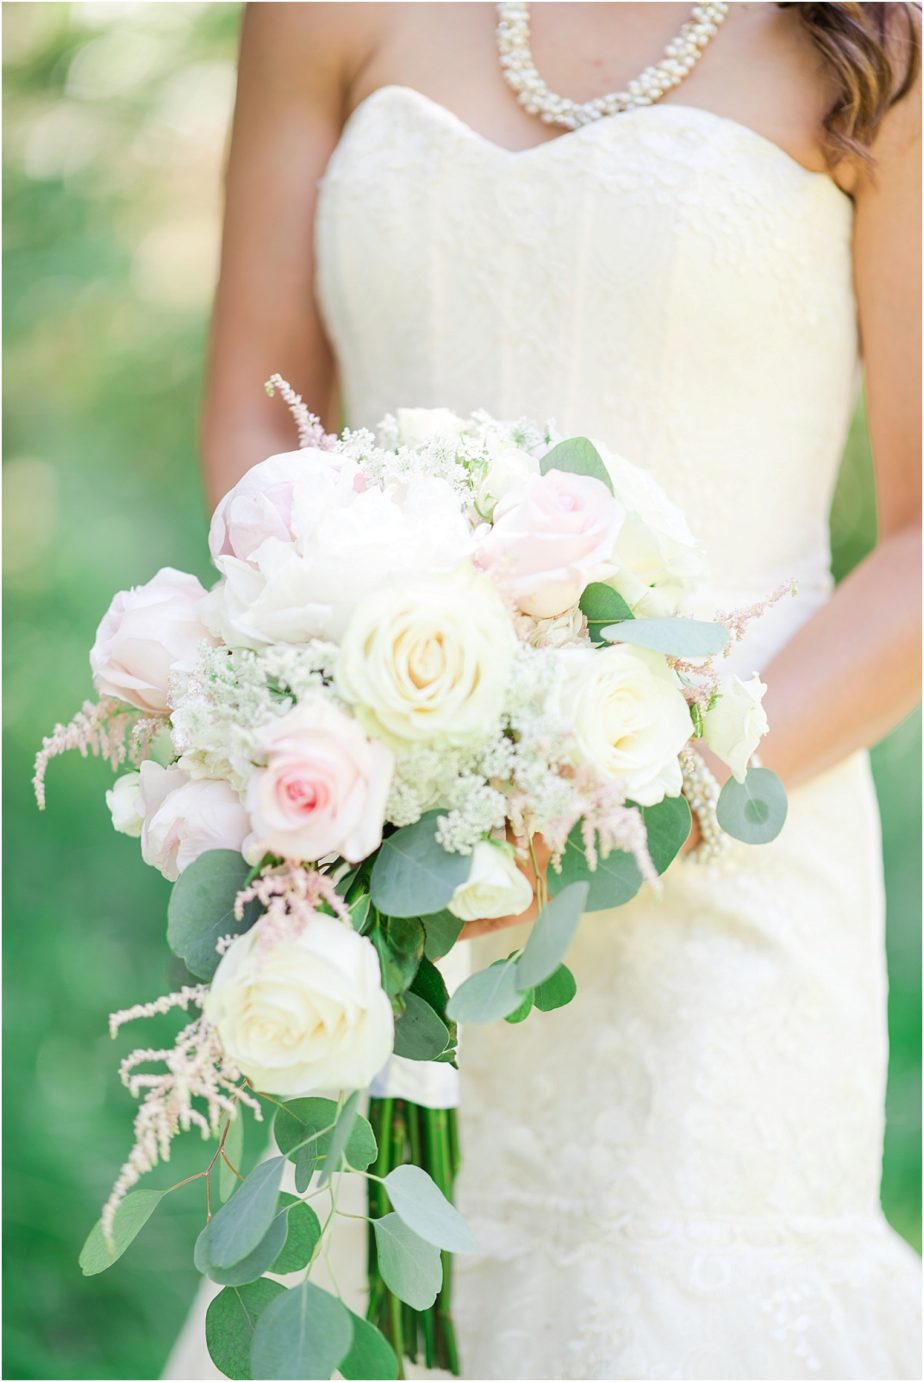 Favorite wedding flowers of 2017 For brides blush and white wedding flowers